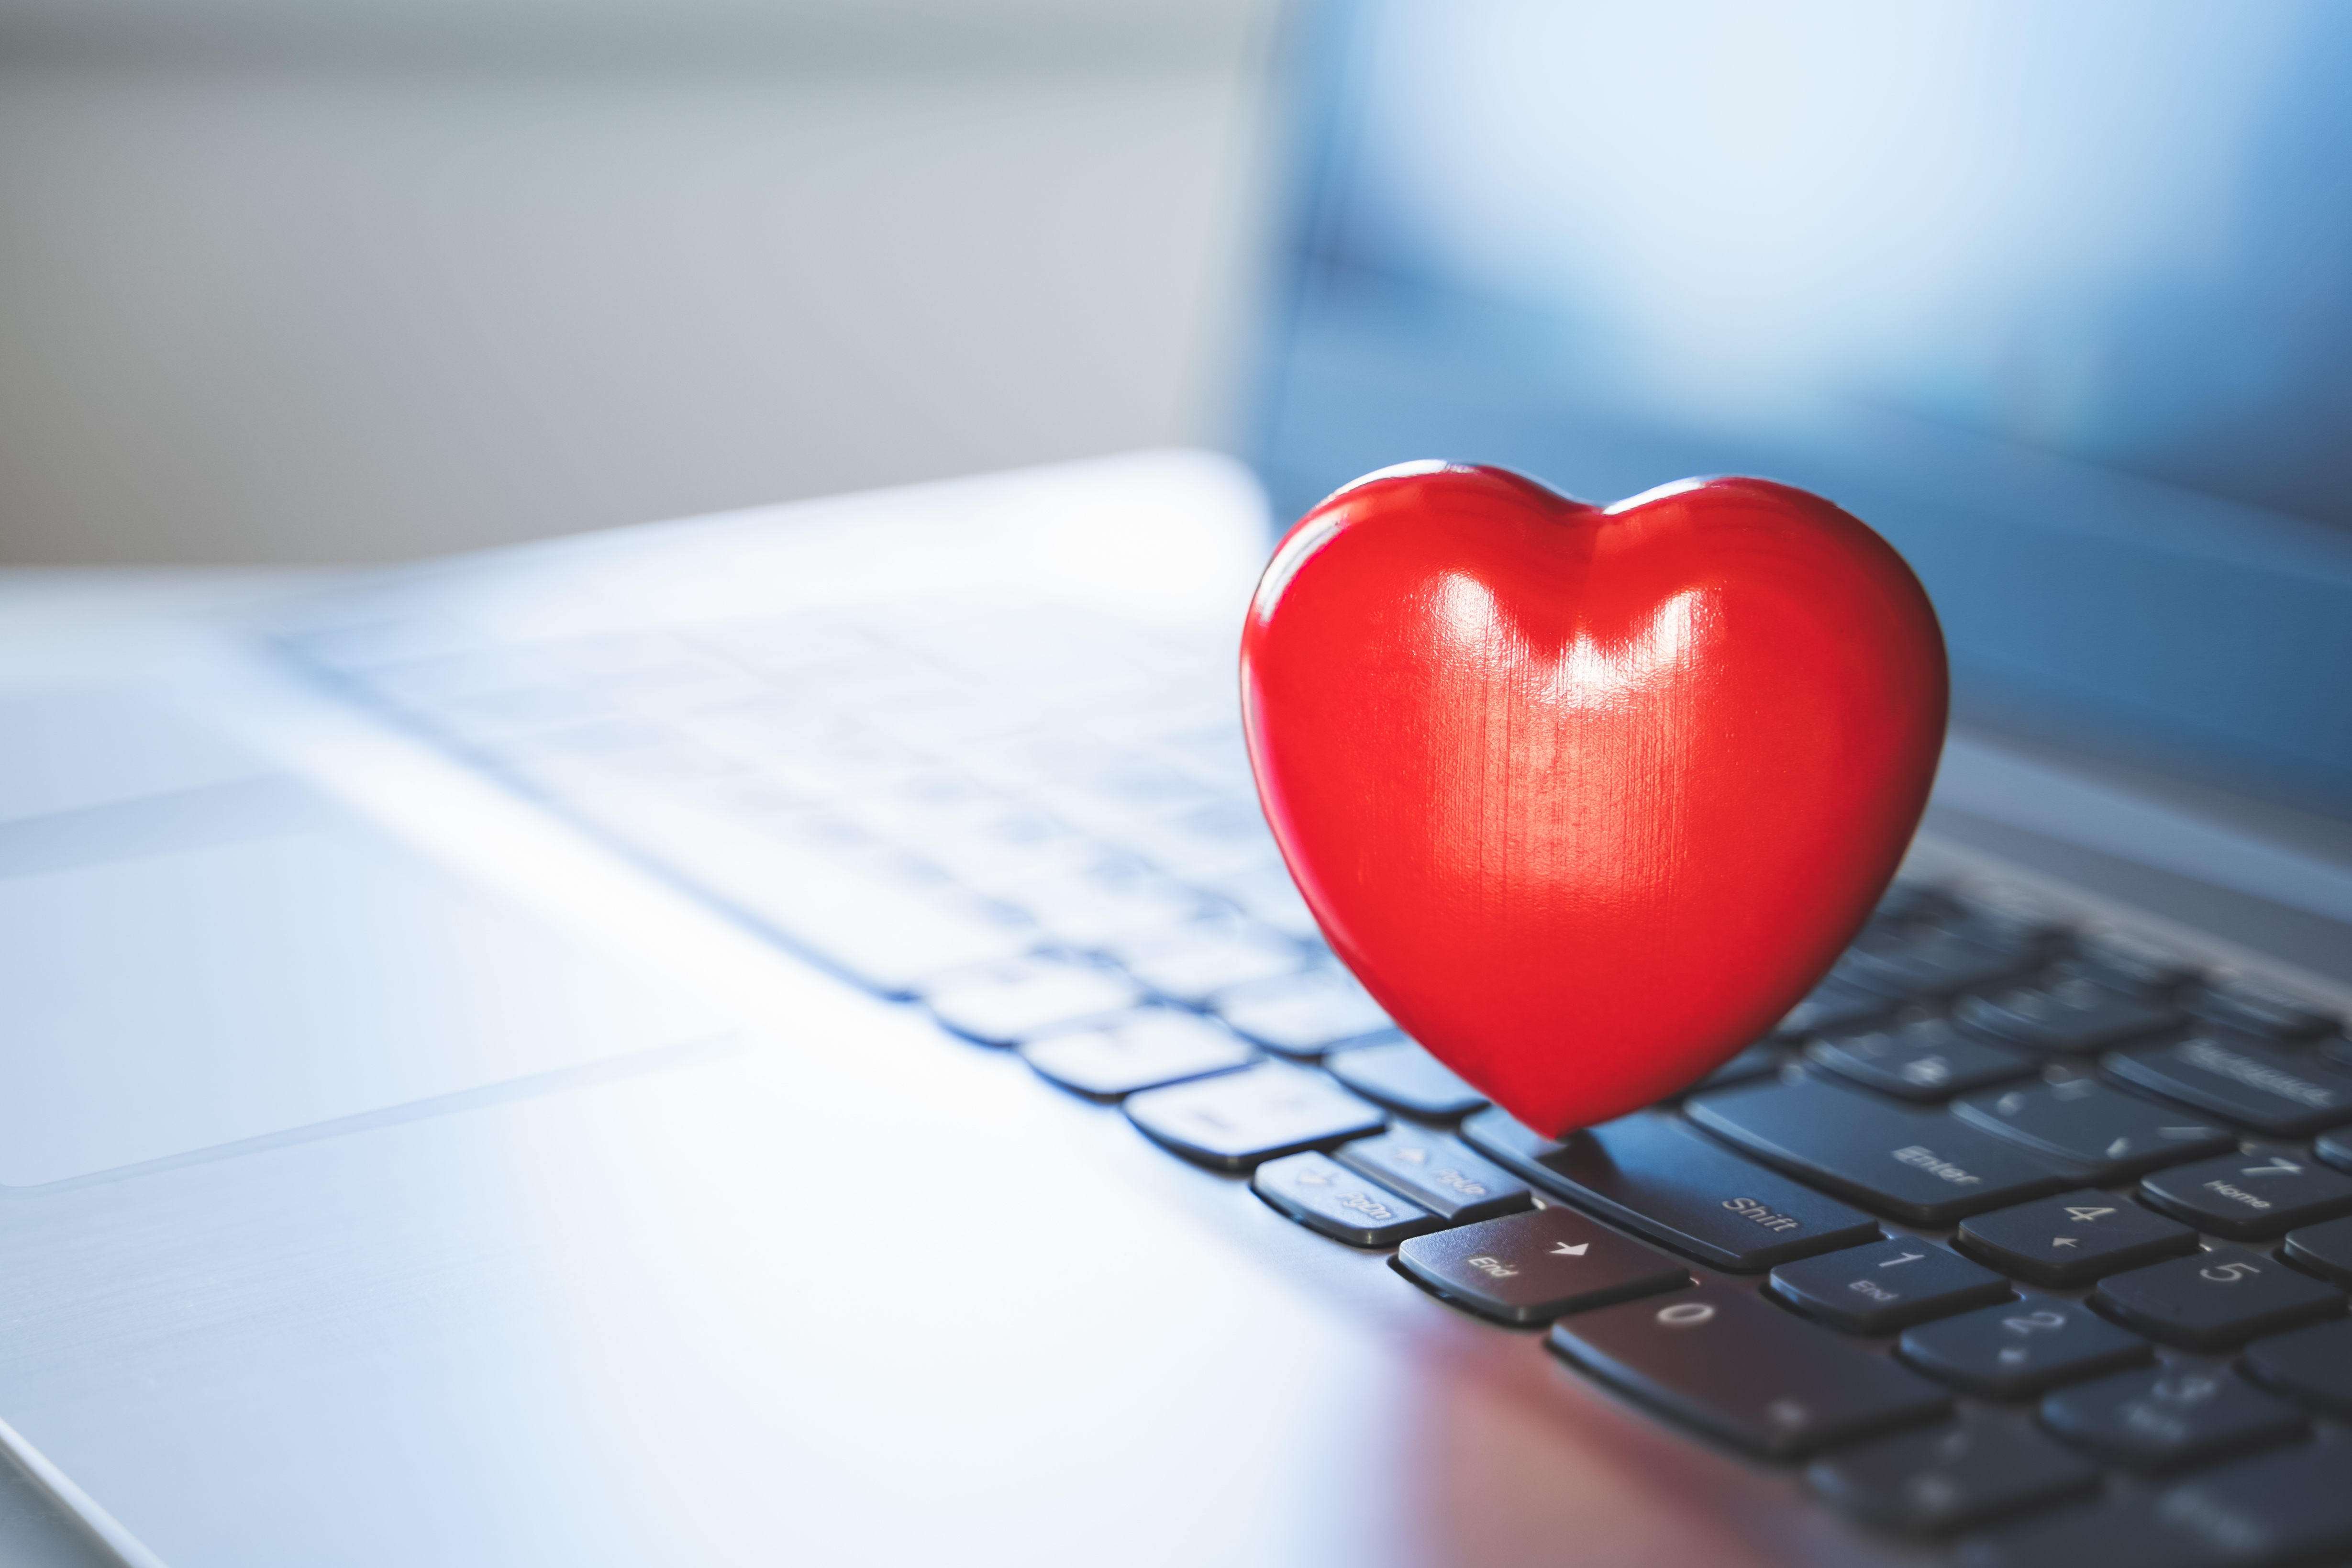 Big red heart on a laptop keyboard